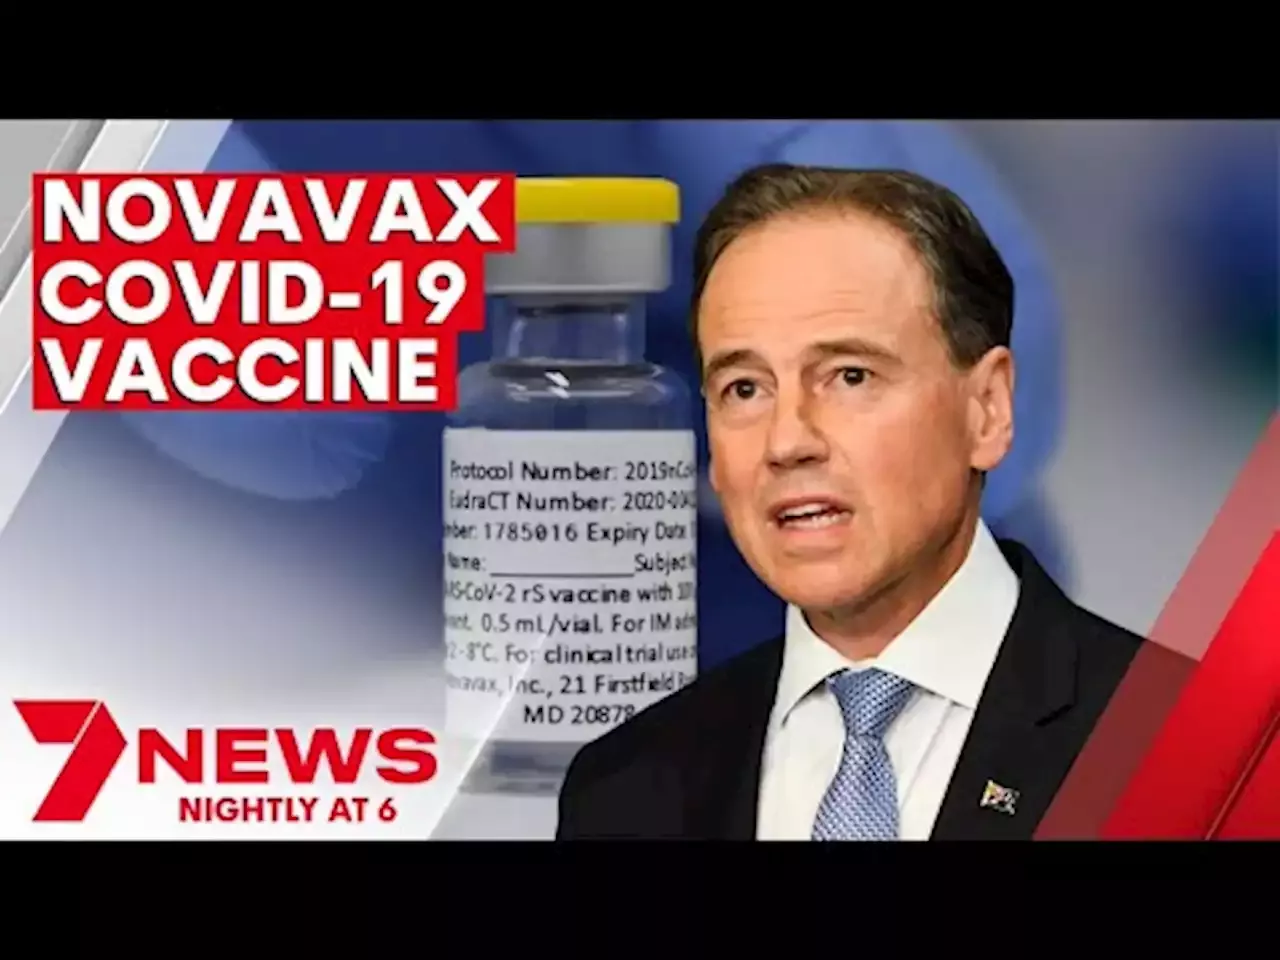 Novavax COVID-19 vaccine to be rolled out in Australia | 7NEWS